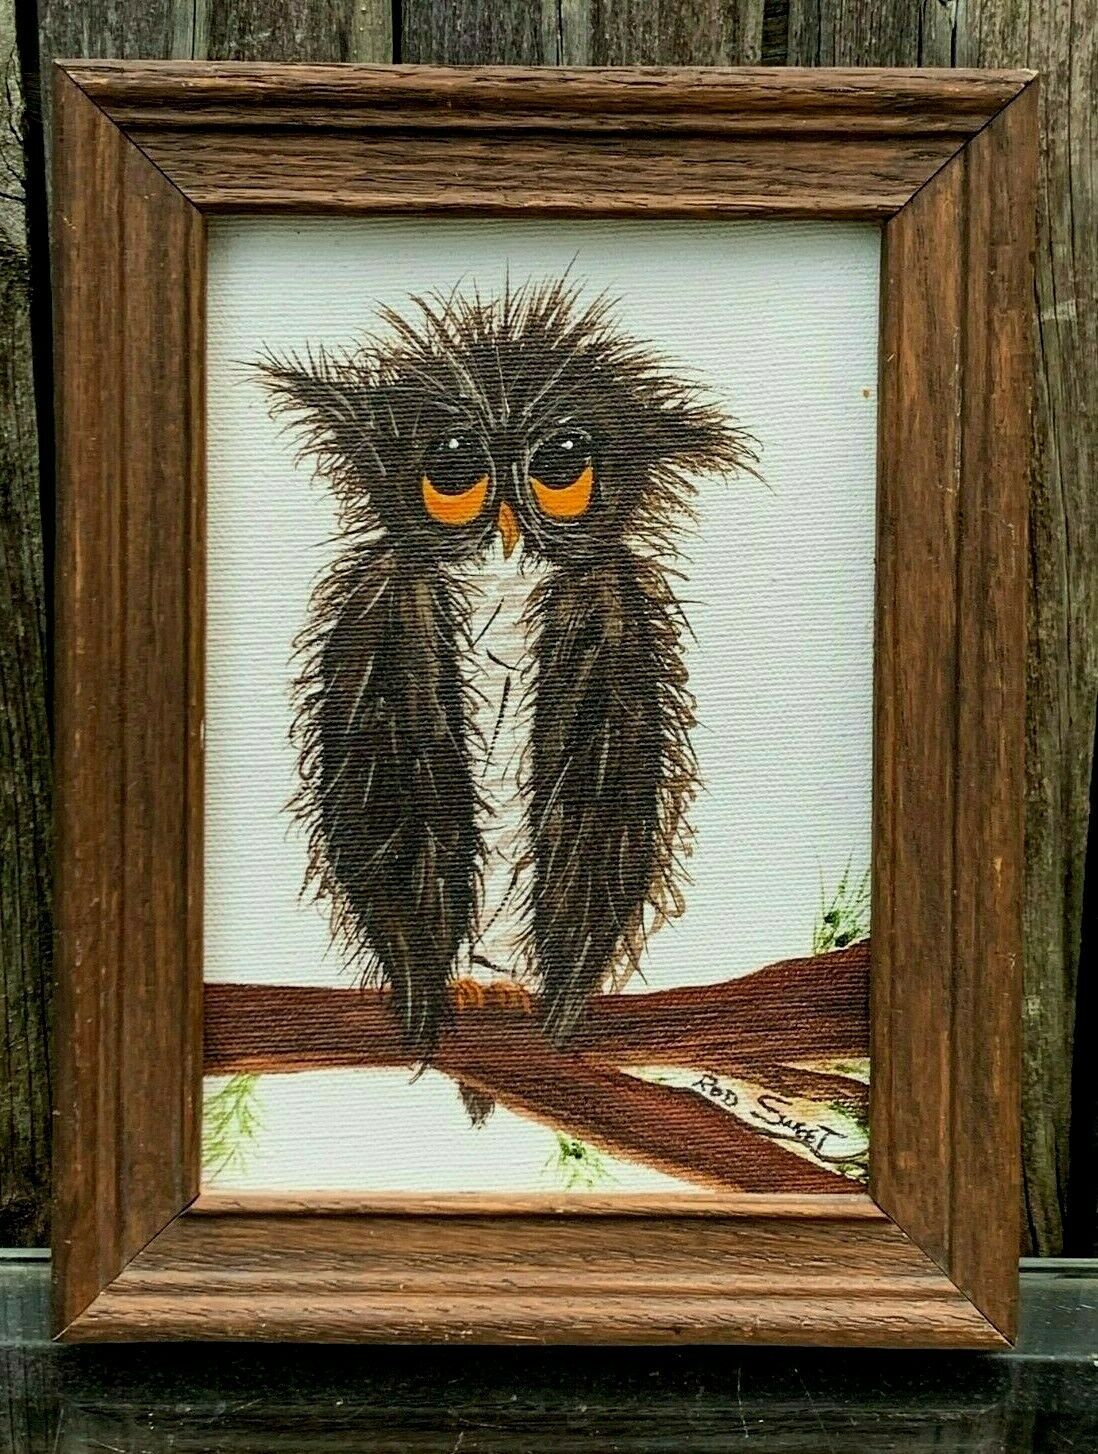 Primary image for RODNEY ROD SWEET SIGNED OWL OIL PAINTING GARDEN GROVE CA 92640 BIRD CALIFORNIA